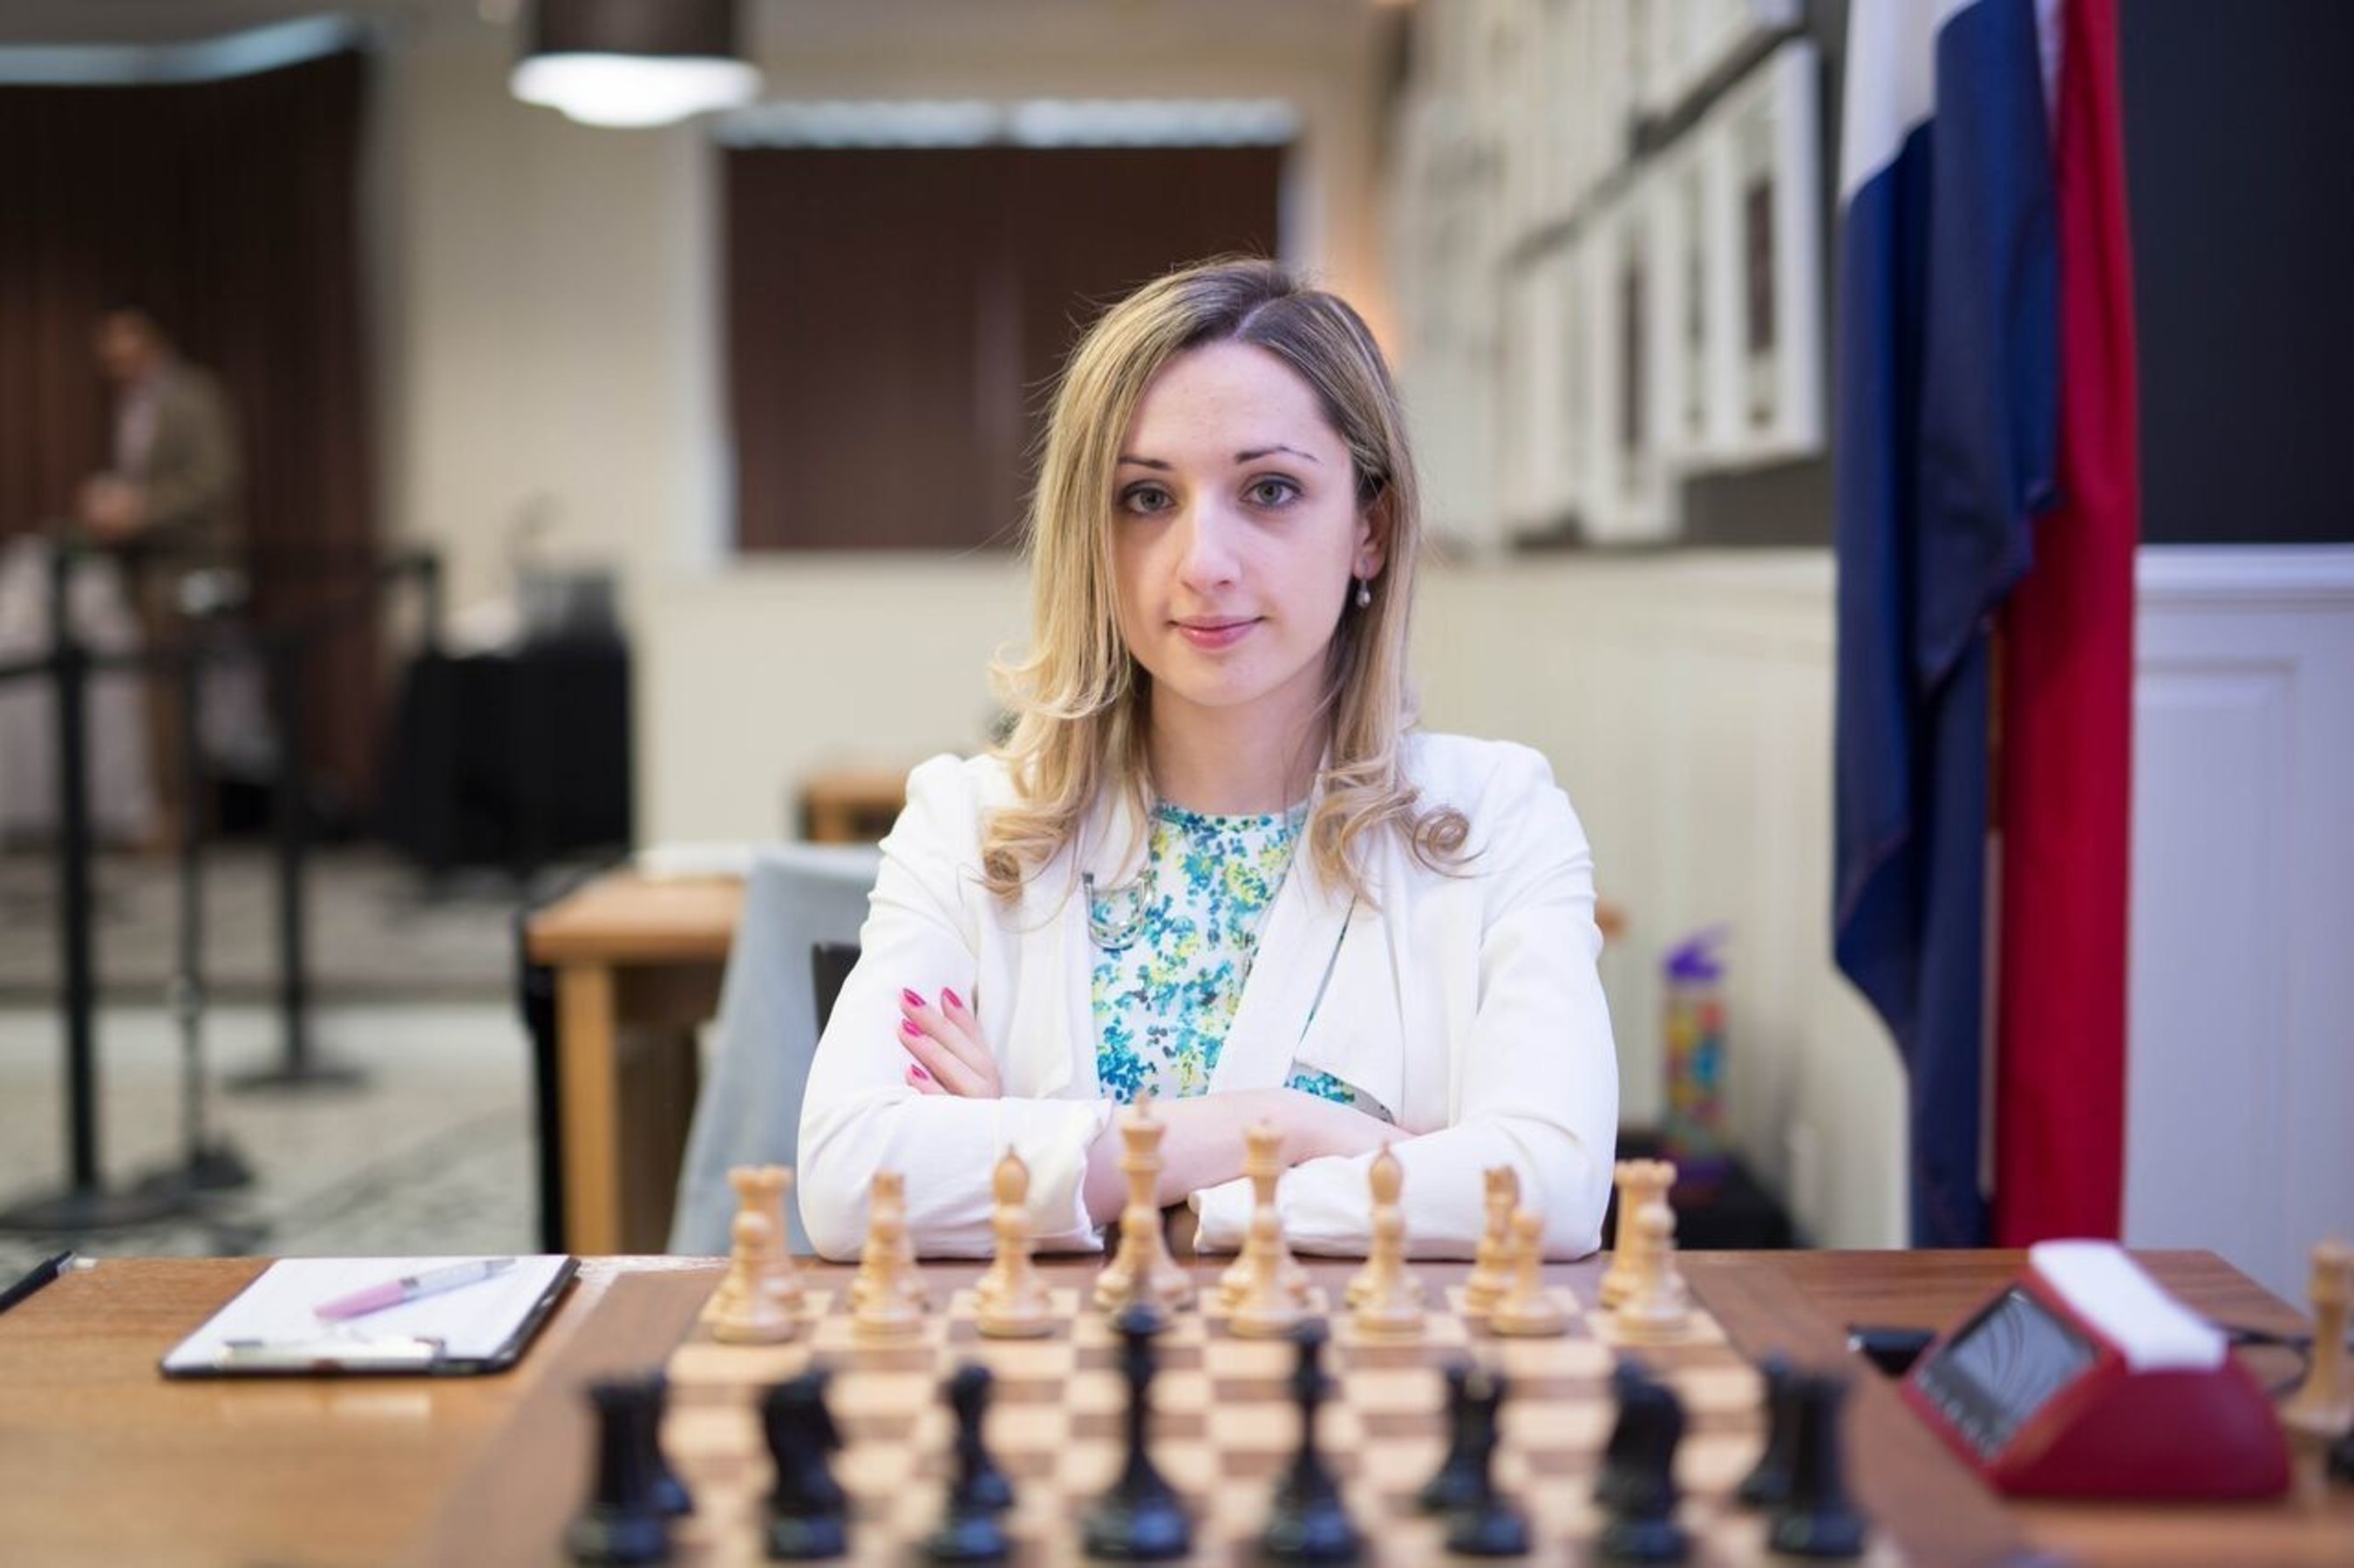 International Master Nazi Paikidze was named the 2016 U.S. Women's Champion upon the concluding round of the U.S. Chess and Women's Championships at the Chess Club and Scholastic Center of Saint Louis (CCSCSL) April 25. Paikidze faced 11 opponents in nearly two weeks of tournament play to win the title and $25,000 prize. Paikidze, 22, and 2016 U.S. Chess Champion Fabiano Caruana, 23, are among the youngest combined pair of U.S. Champions in the tournament's history.